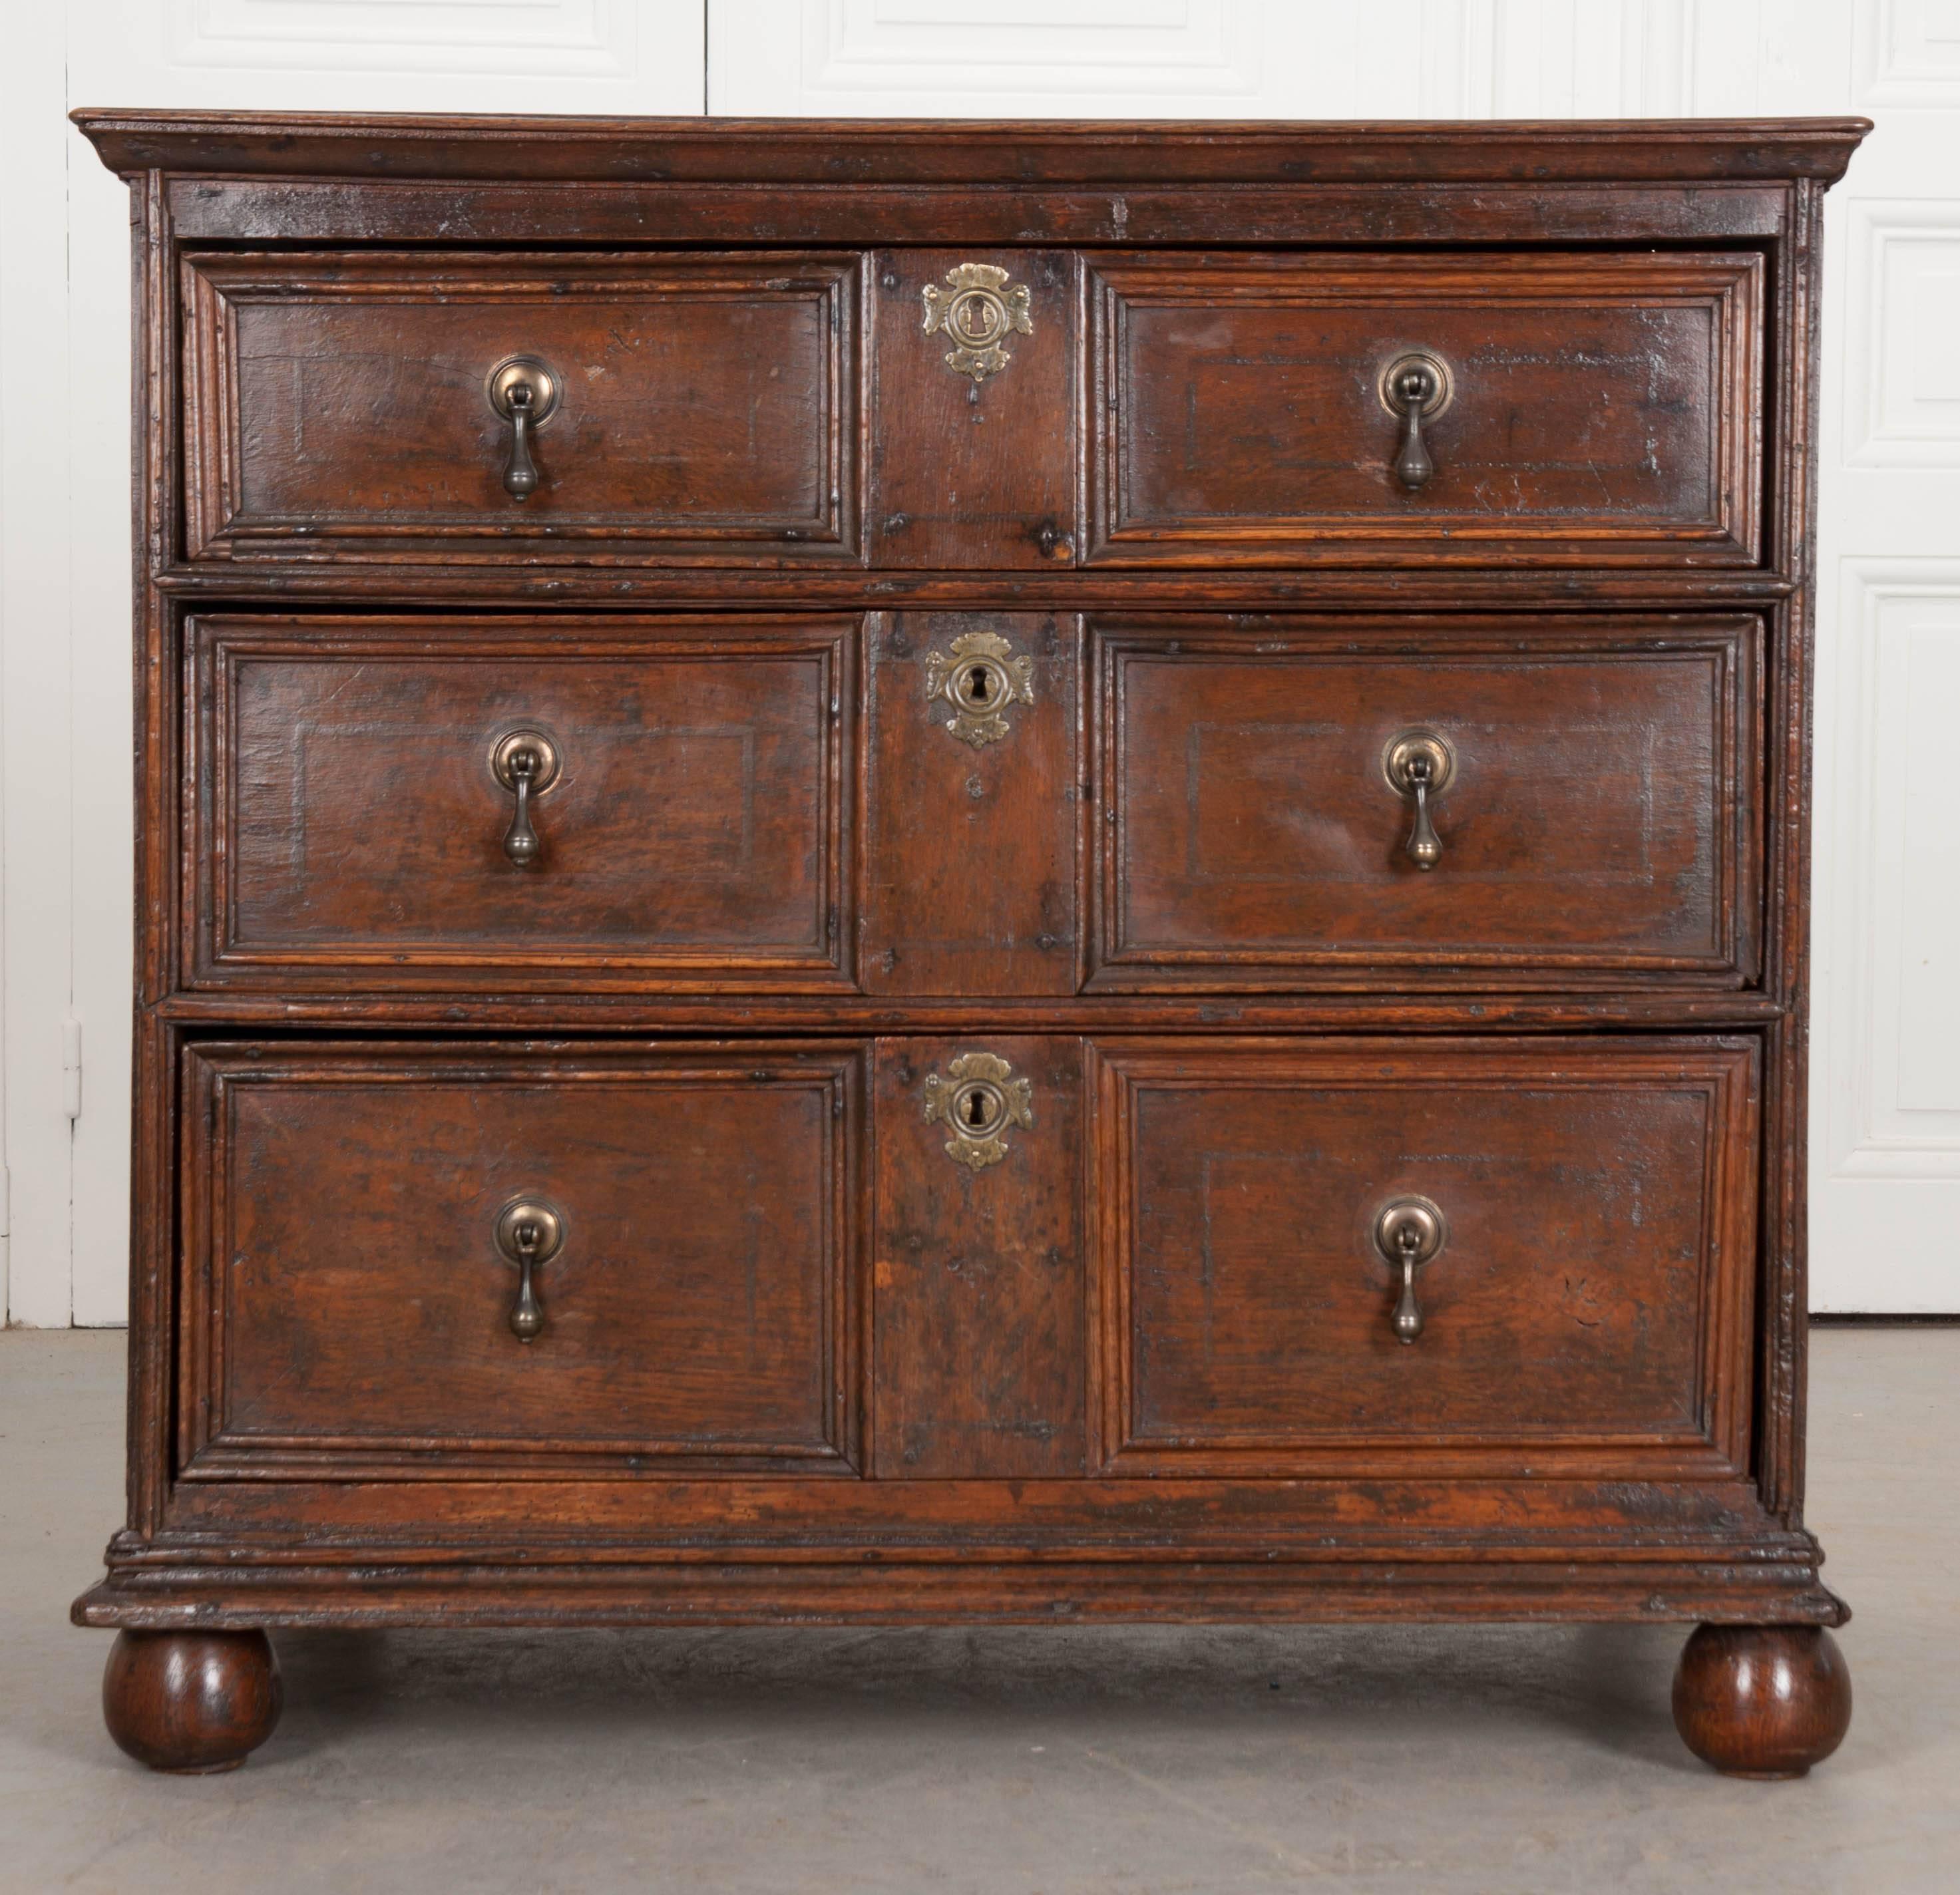 A handsome three-drawer Jacobean oak chest, made in England, circa 1720. This nearly three hundred year old antique chest is in amazing antique condition, with a rich, deep color expressed in the oak and the classic linear design that is found in